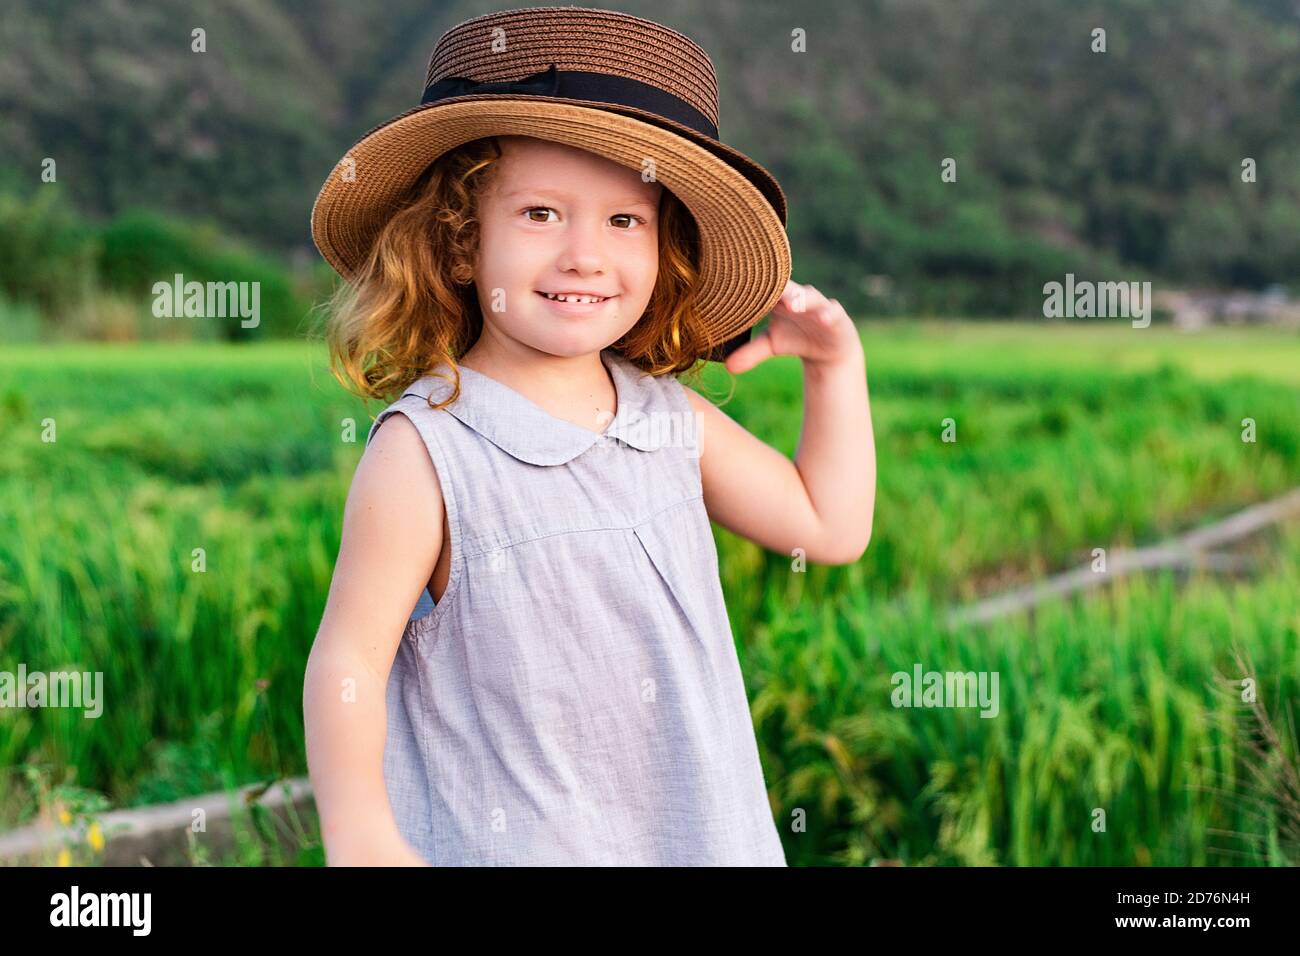 Child girl in straw hat. Cute kid looking at nature lanscape background. Adventure travel concept in retro style Stock Photo